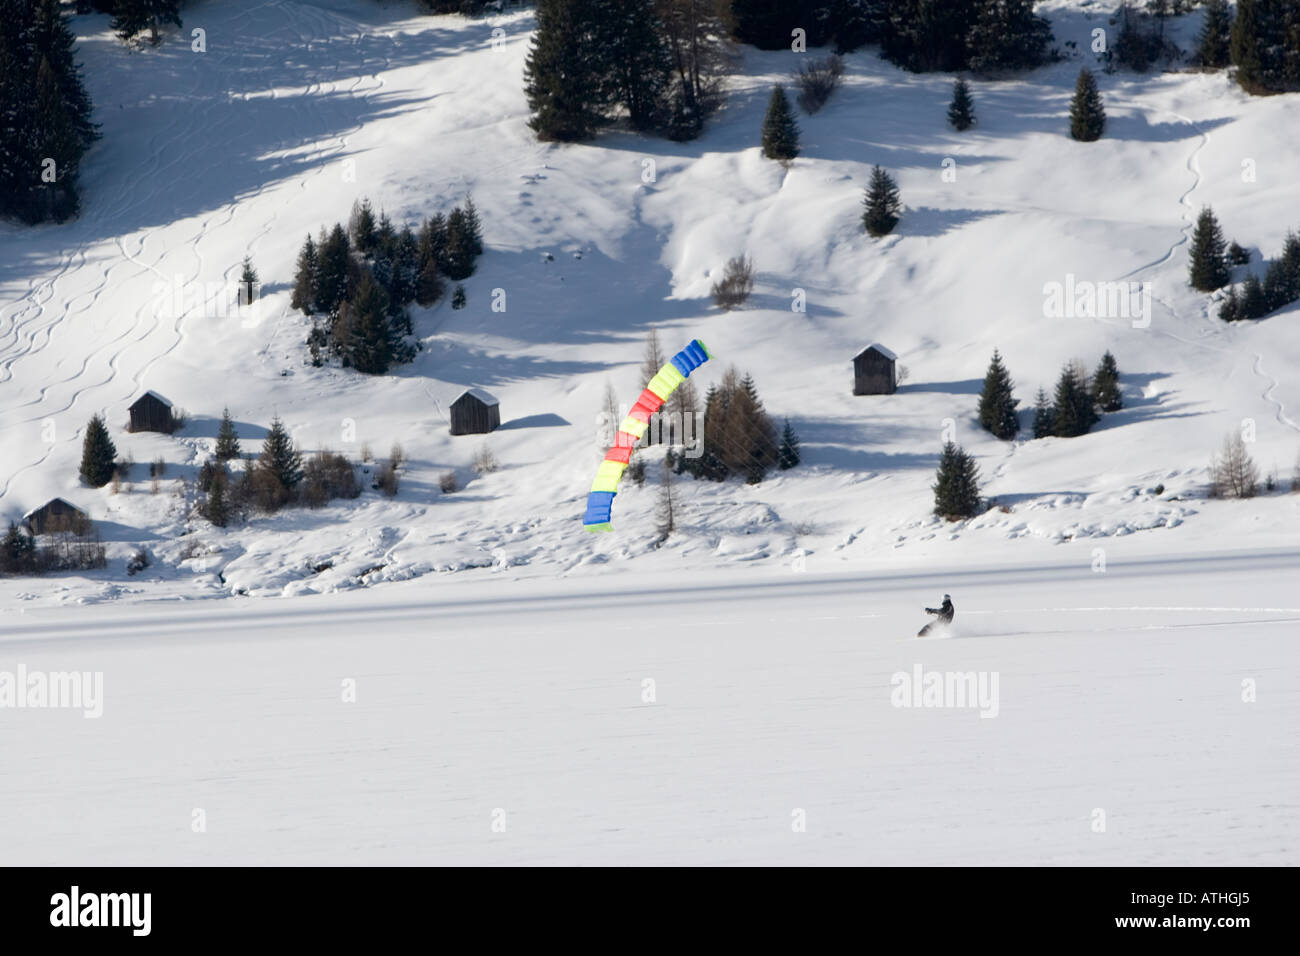 snowboarding with parachute on the frozen man-made lake of Resia, Italy  Stock Photo - Alamy